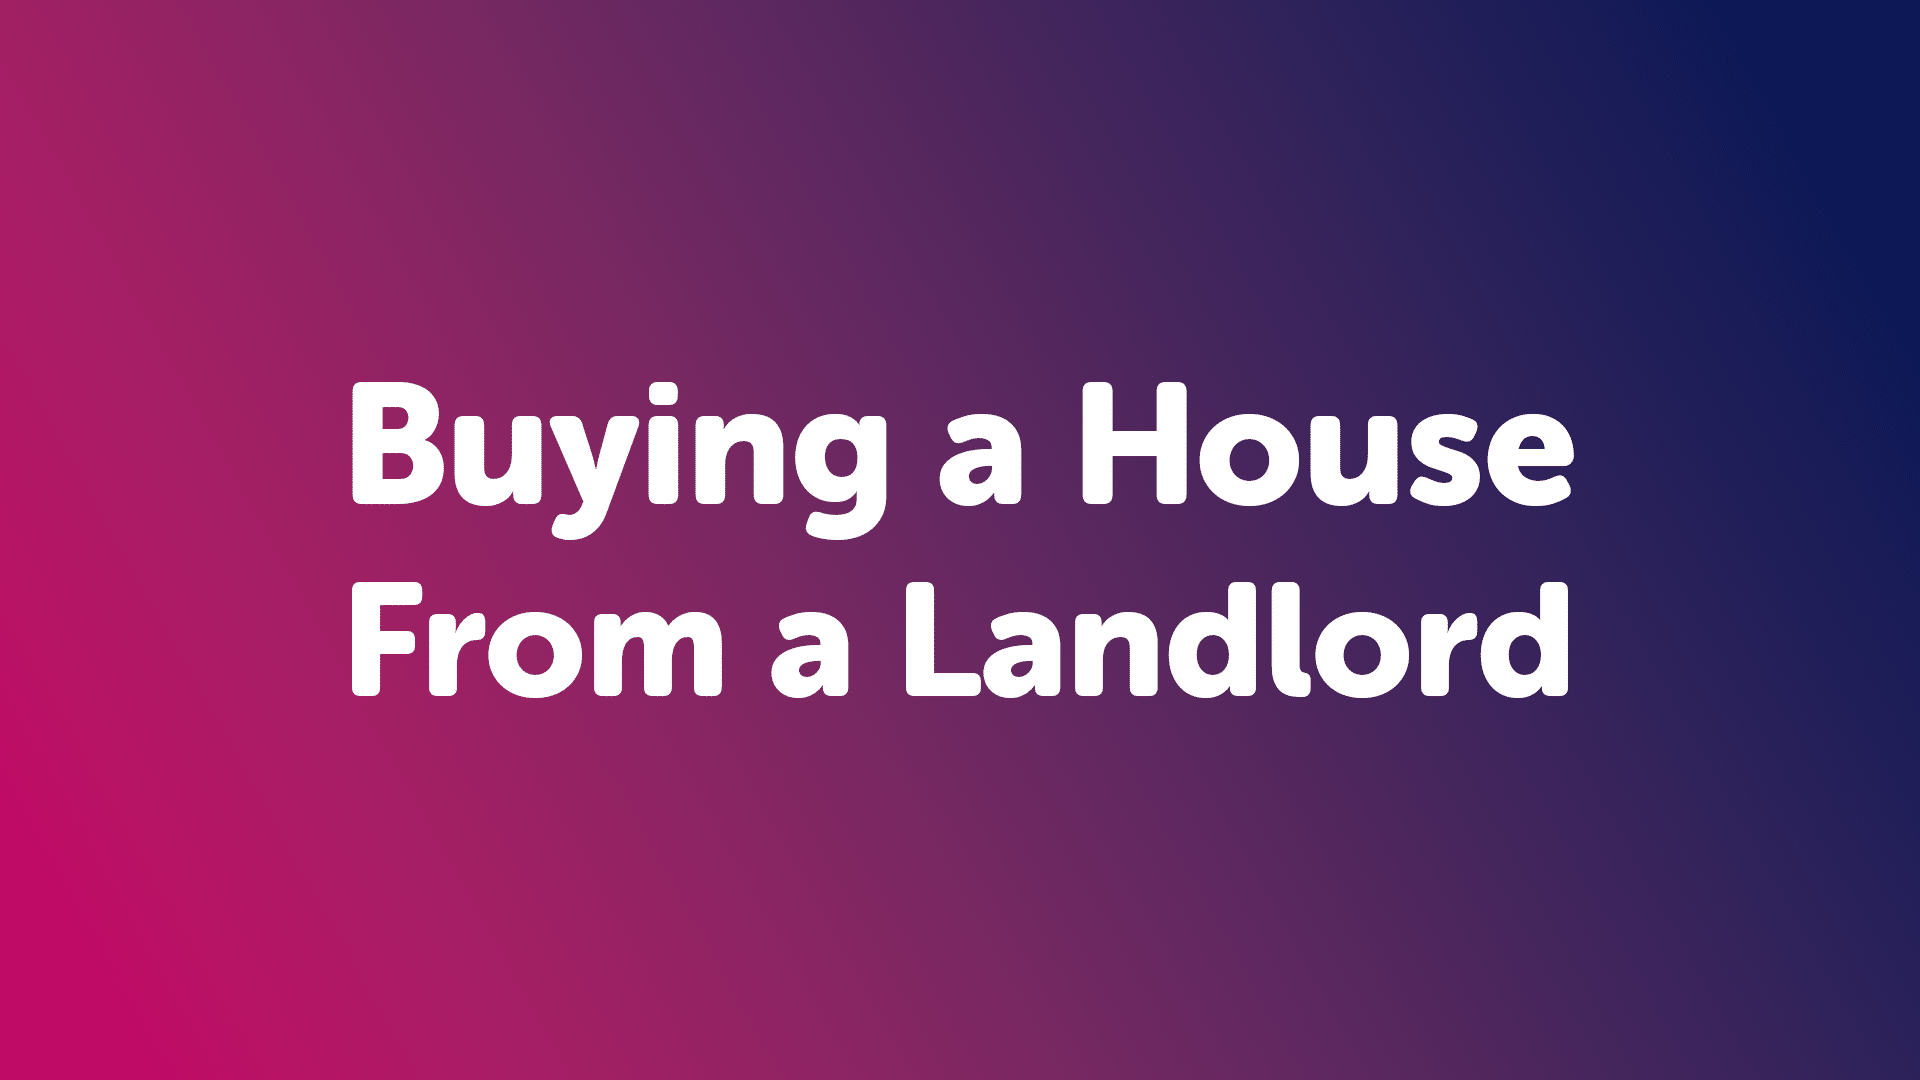 Buying a House From a Landlord